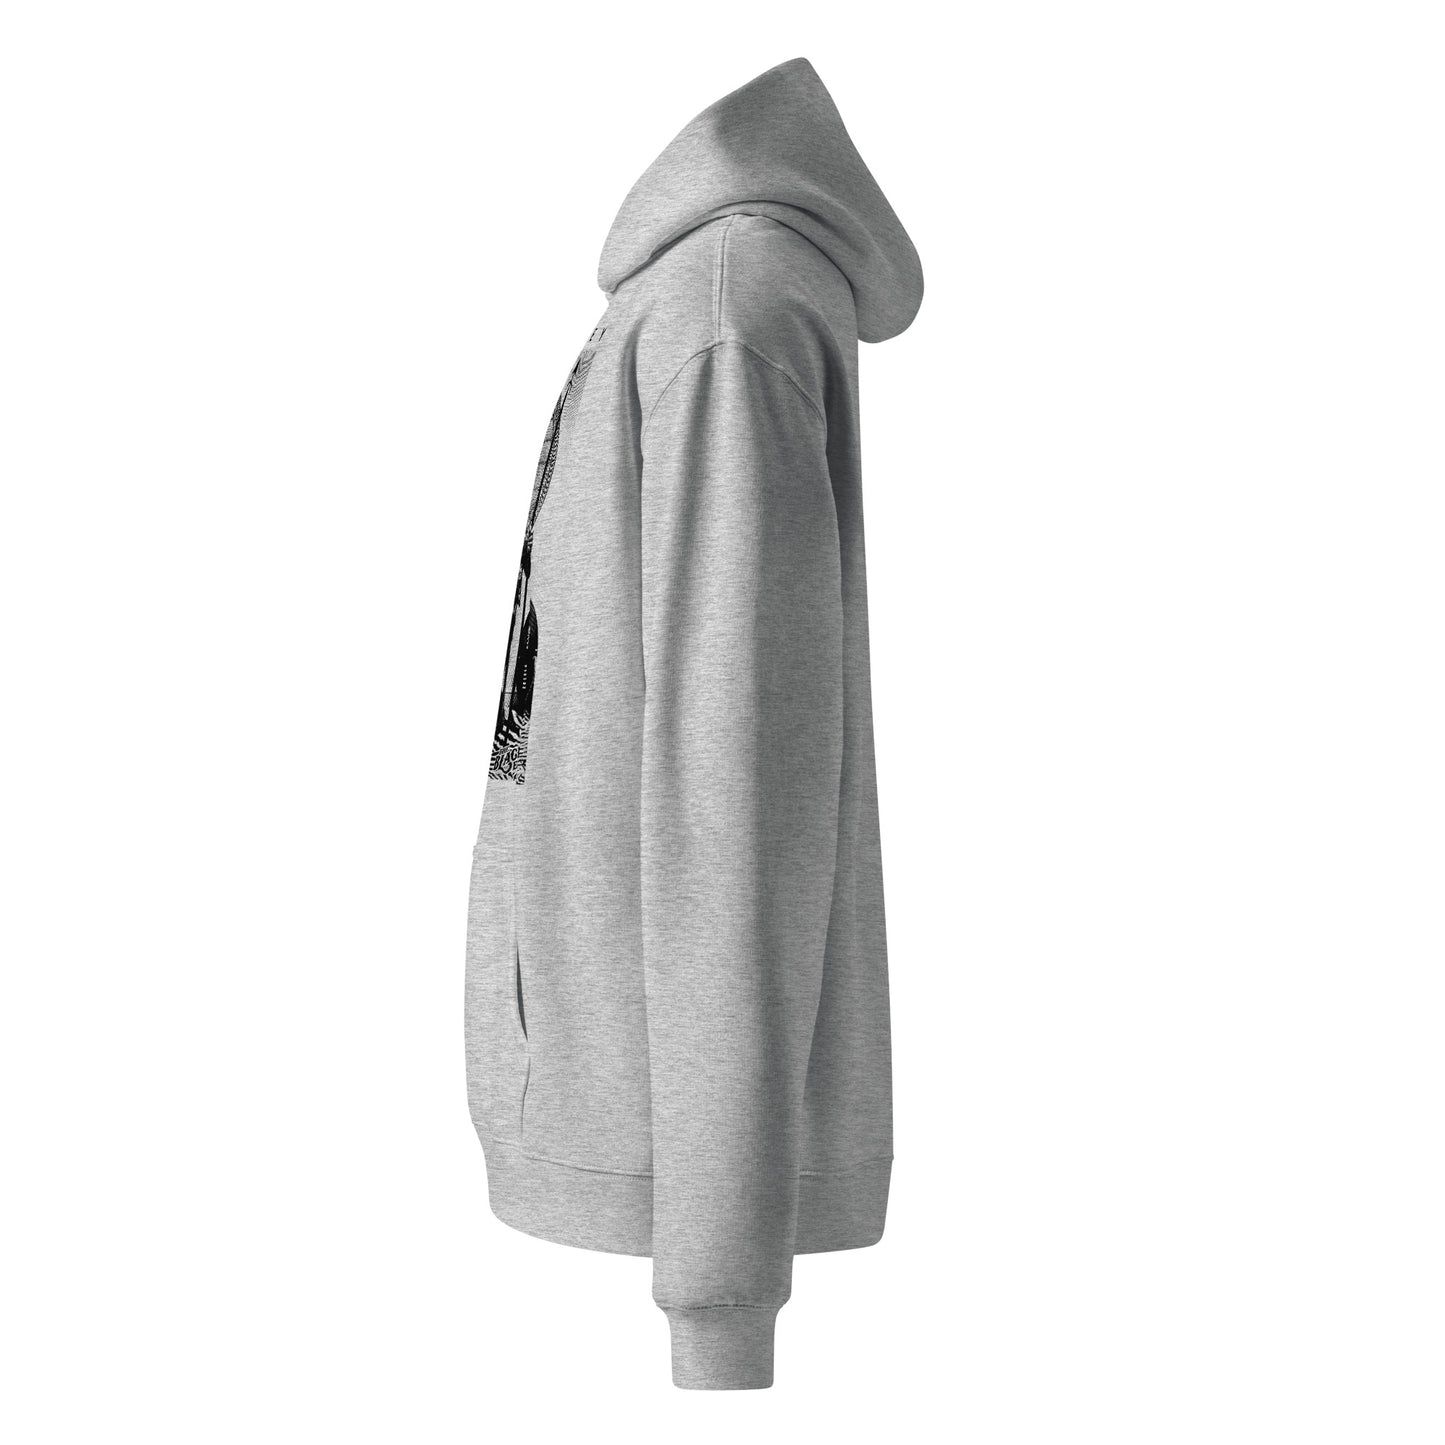 a grey hoodie with a black and white image of huey p newton on it